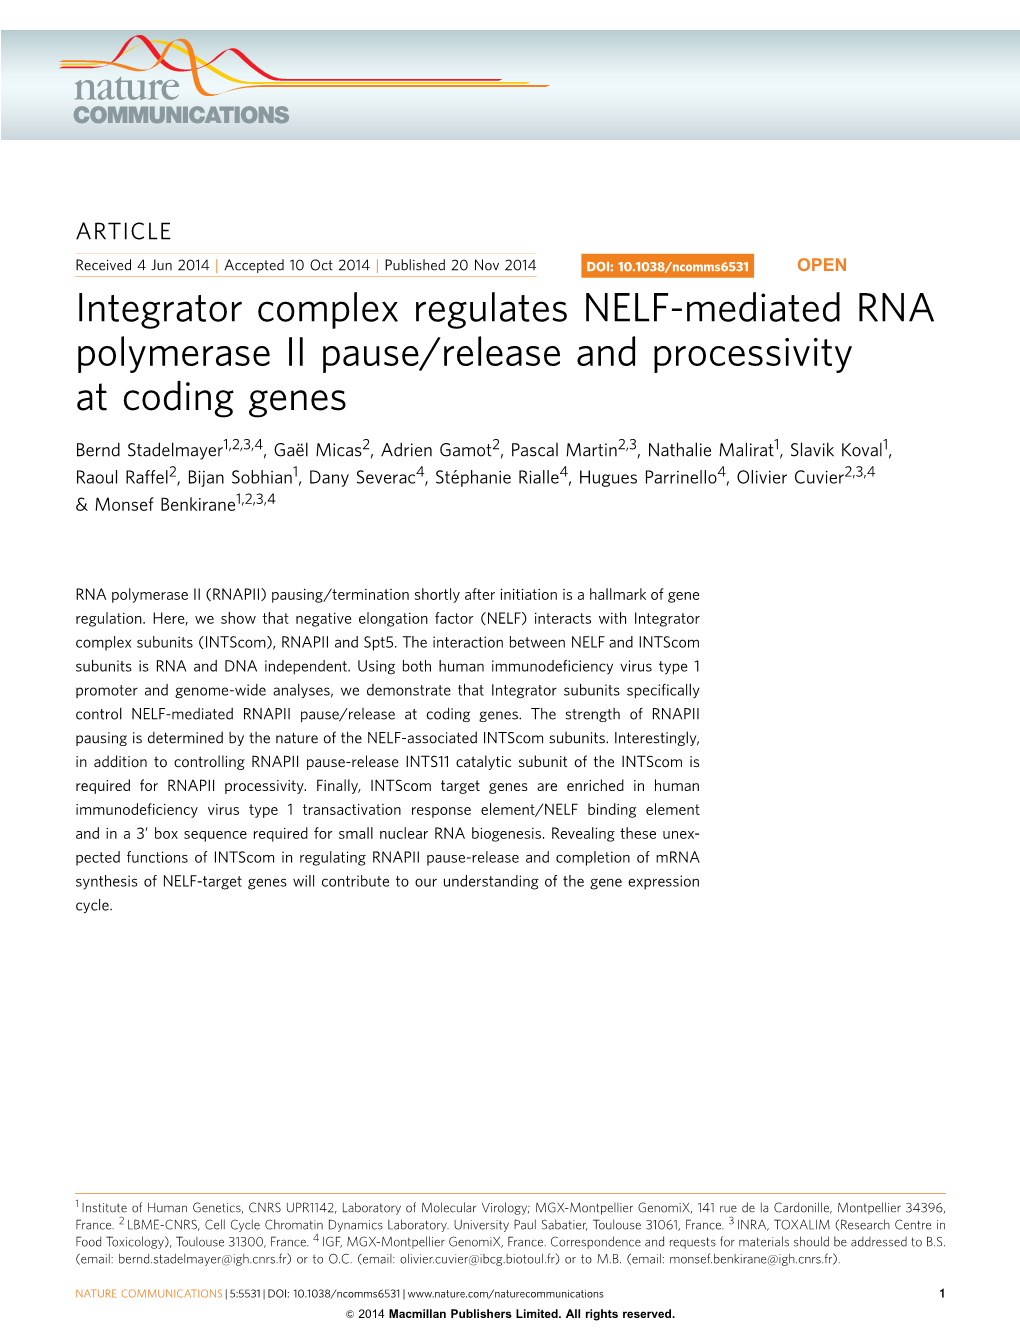 Integrator Complex Regulates NELF-Mediated RNA Polymerase II Pause/Release and Processivity at Coding Genes